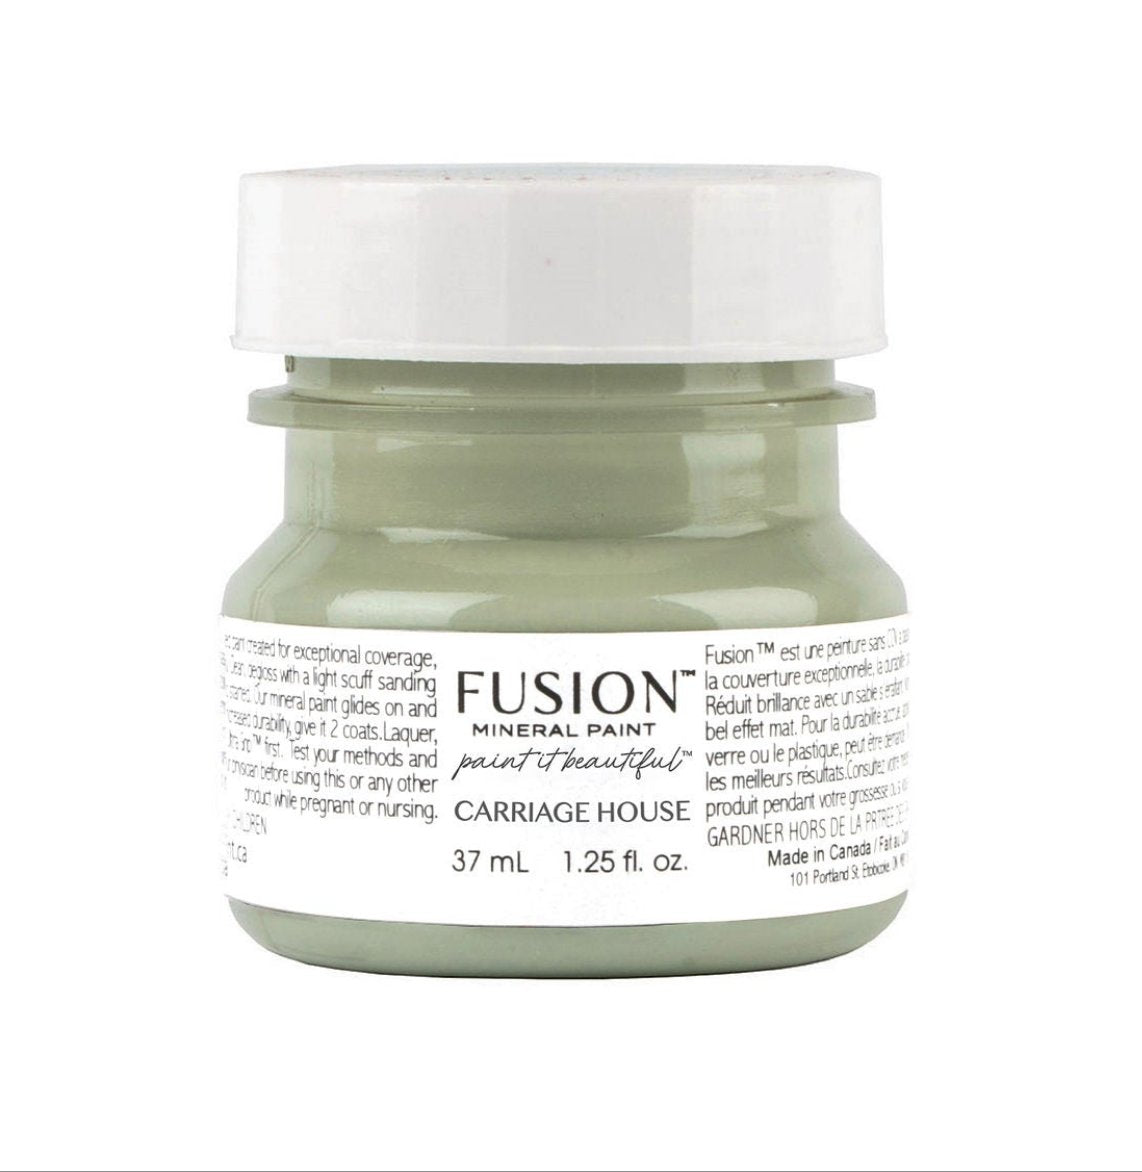 Fusion mineral paint carriage house tester pot